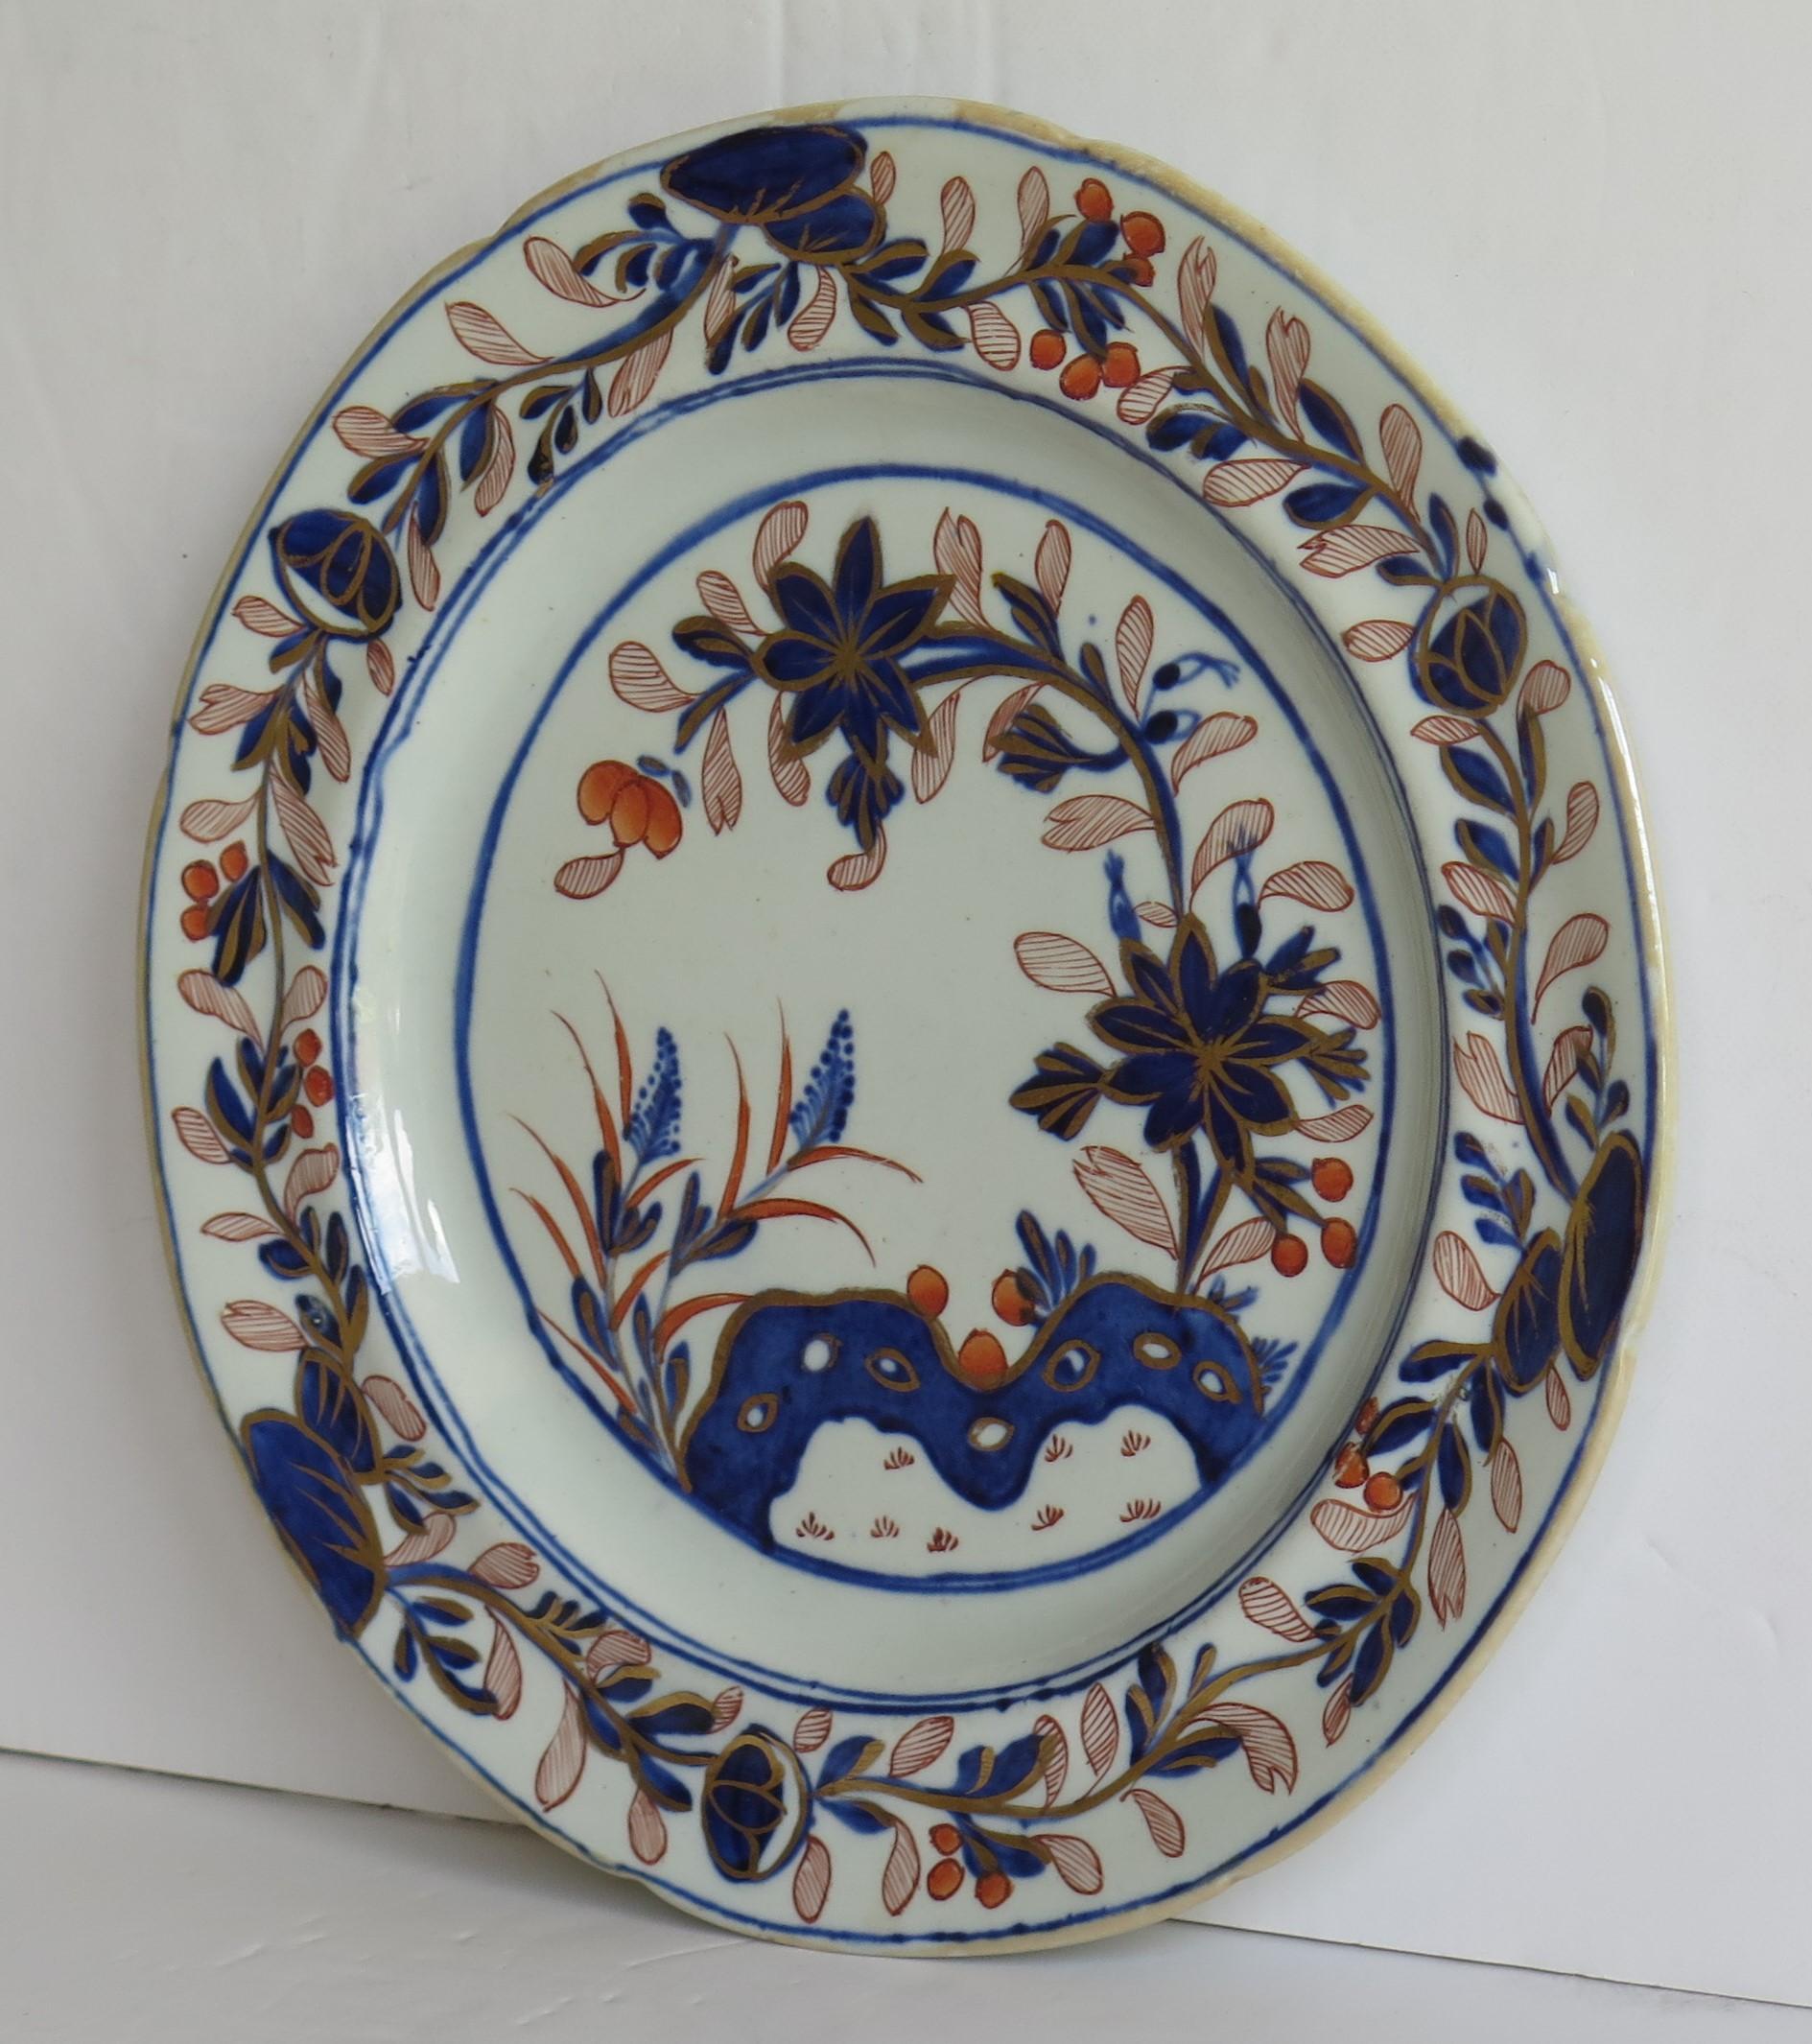 This is a fine Ironstone pottery side plate made by the Mason's factory at Lane Delph, Staffordshire, England and beautifully hand decorated in the Rock, Leaves and flowers Pattern, fully stamped and dating to the earliest period of Mason's